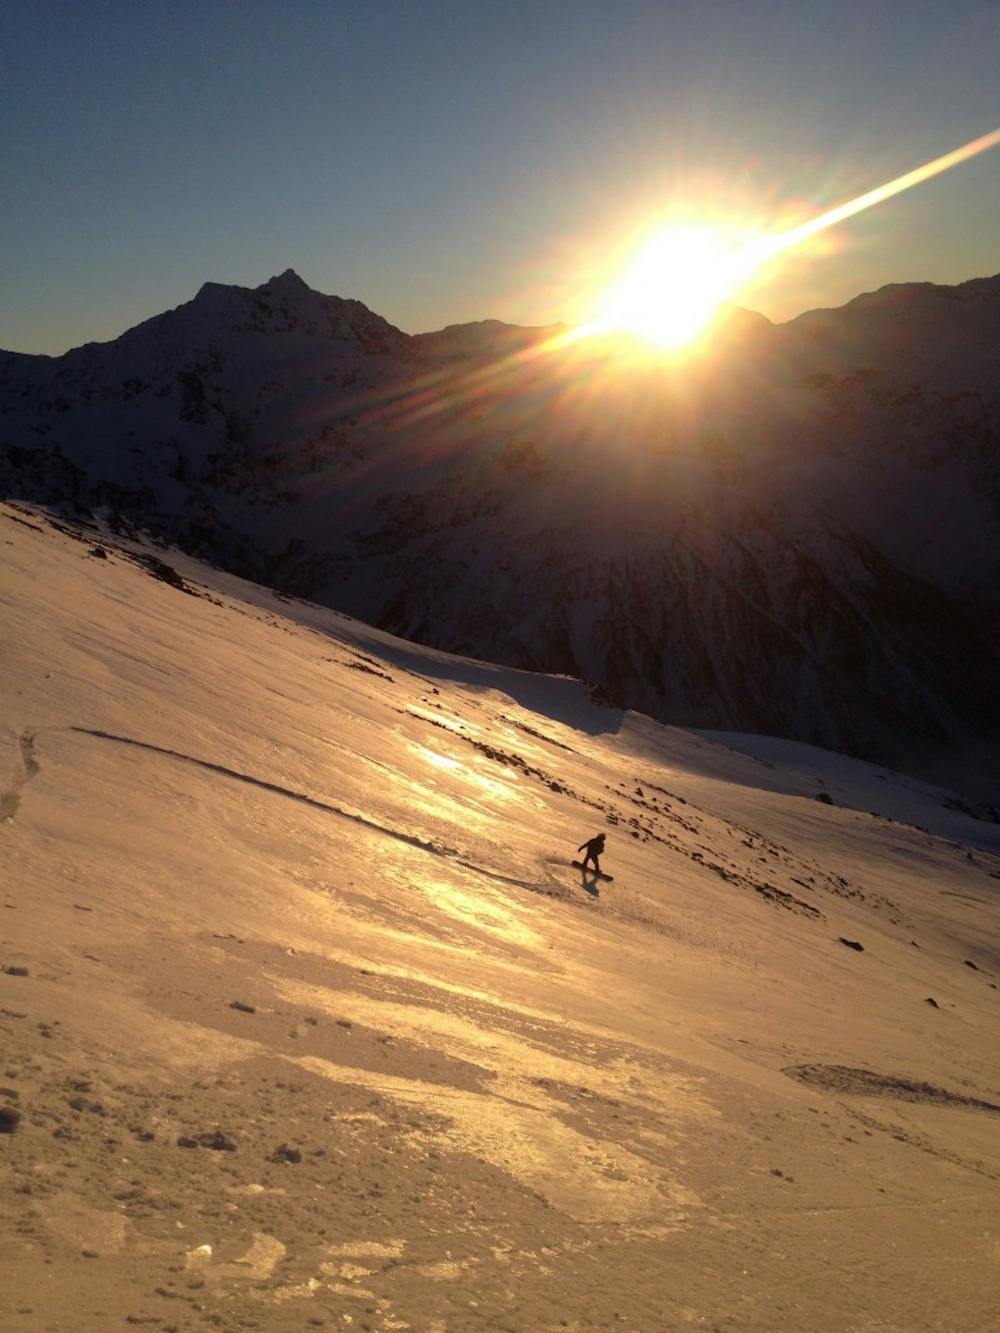 Snowboarding down the open face at sunset